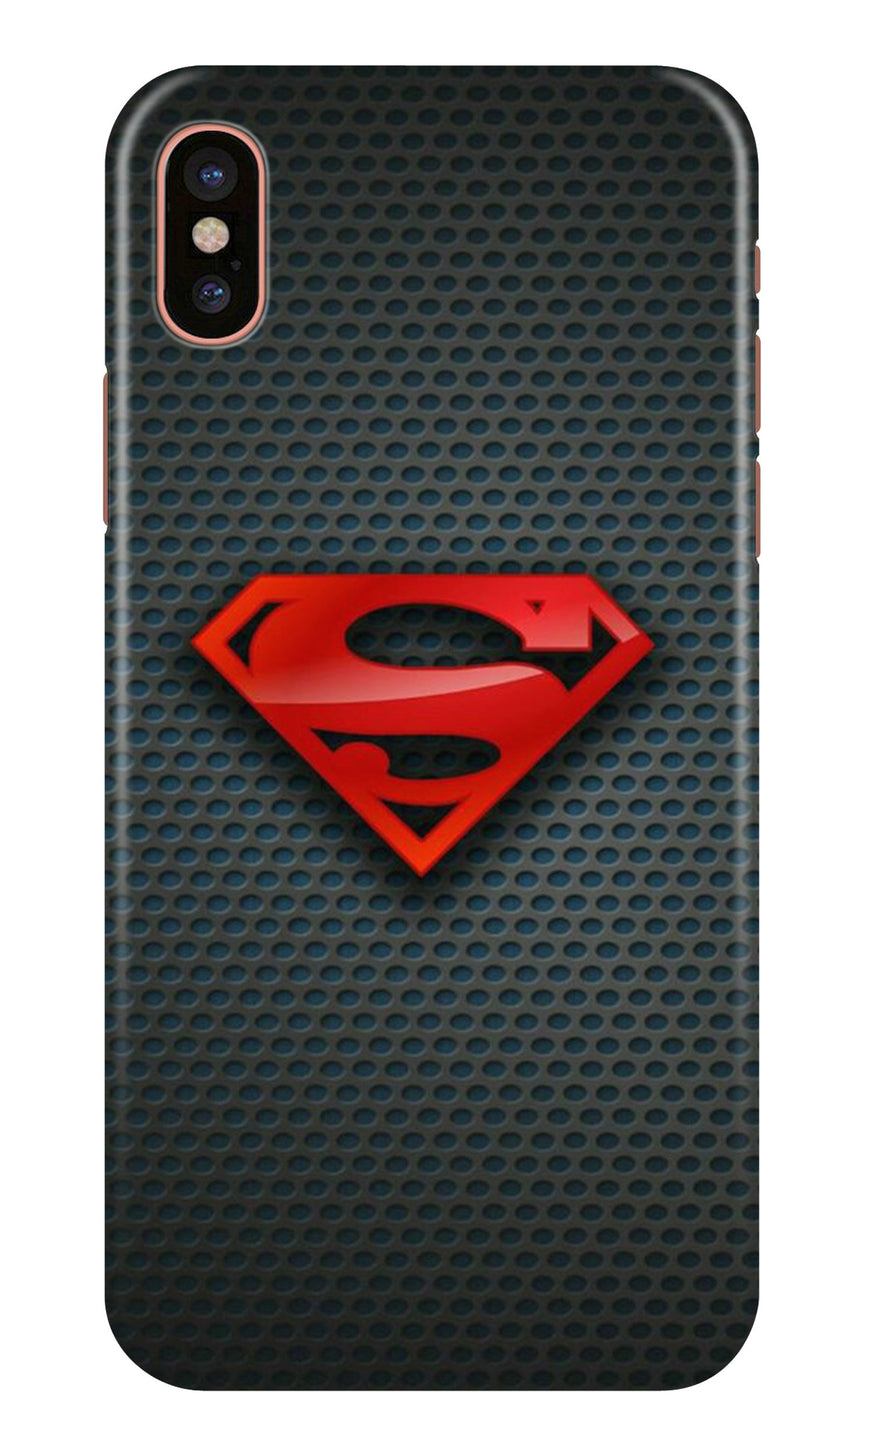 Superman Case for iPhone Xs (Design No. 247)